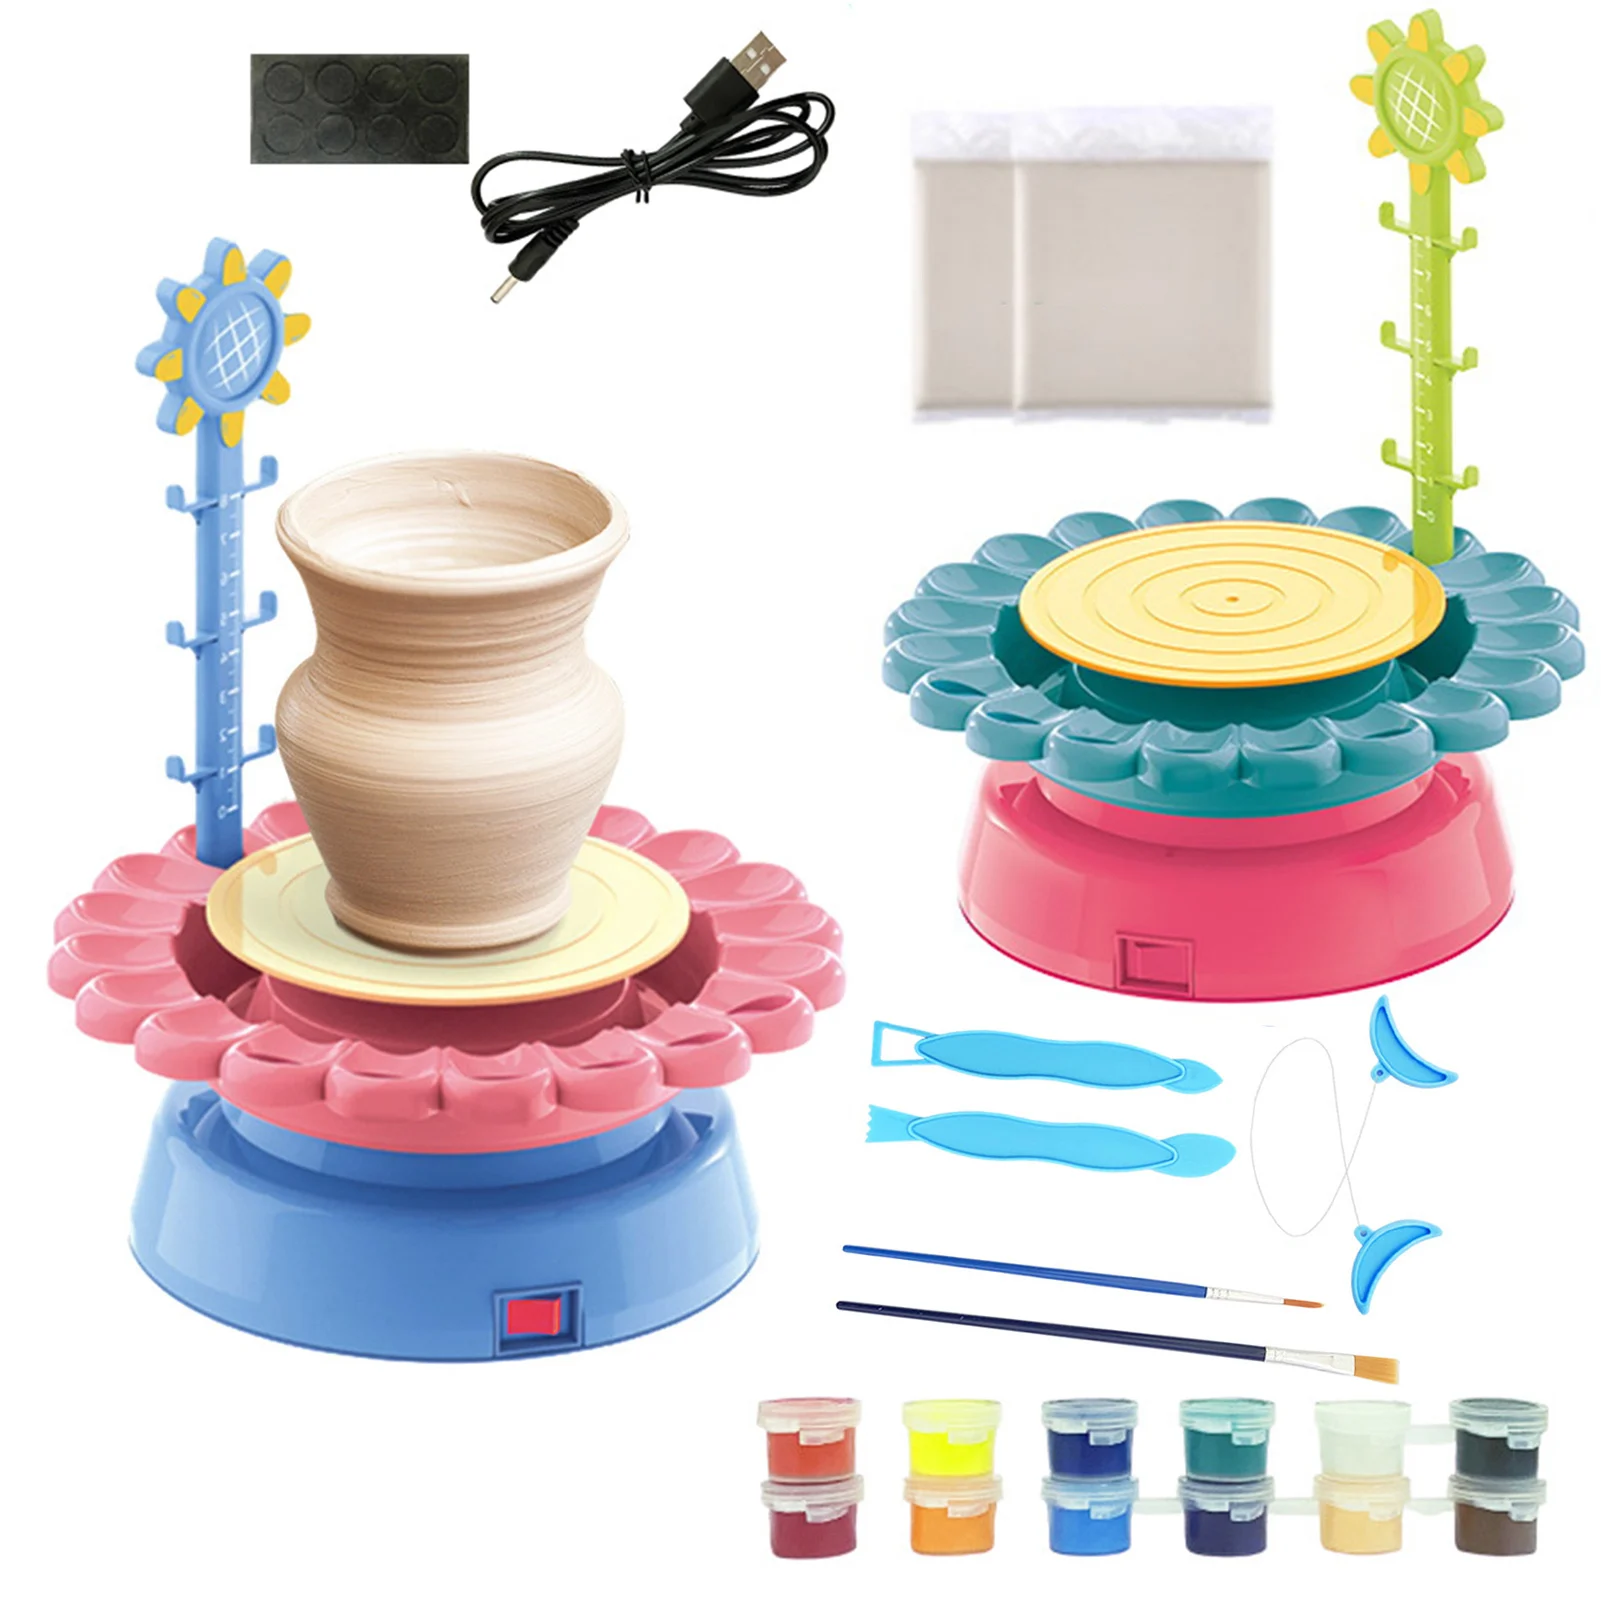 https://ae01.alicdn.com/kf/H5bd5bef9b0924acc8e66dbff00b1c9979/Electric-Pottery-Wheel-Art-Craft-Kit-Arts-And-Crafts-Kids-Toys-Pottery-Forming-Machine-Educational-Entertainment.jpg